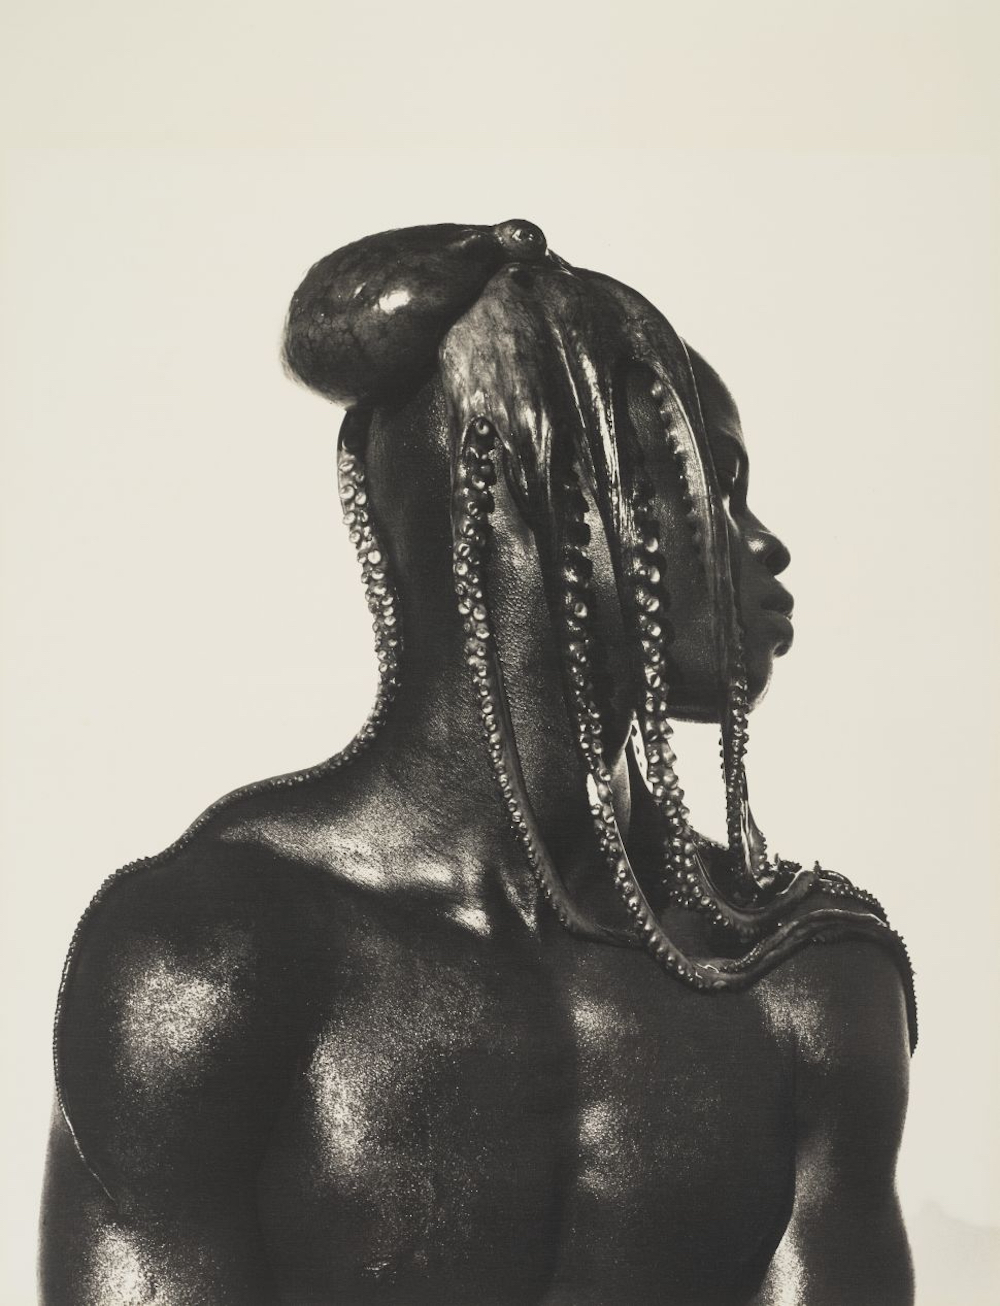 Herb Ritts (1952-2002), Djimon with Octopus, 1989. Gelatin silver print on linen, mounted on board. Image: 28x23¼ in. Estimate: $25,000-35,000. Offered in Photographs from the Richard Gere Collection on 23 March-7 April 2022 at Christie's Online